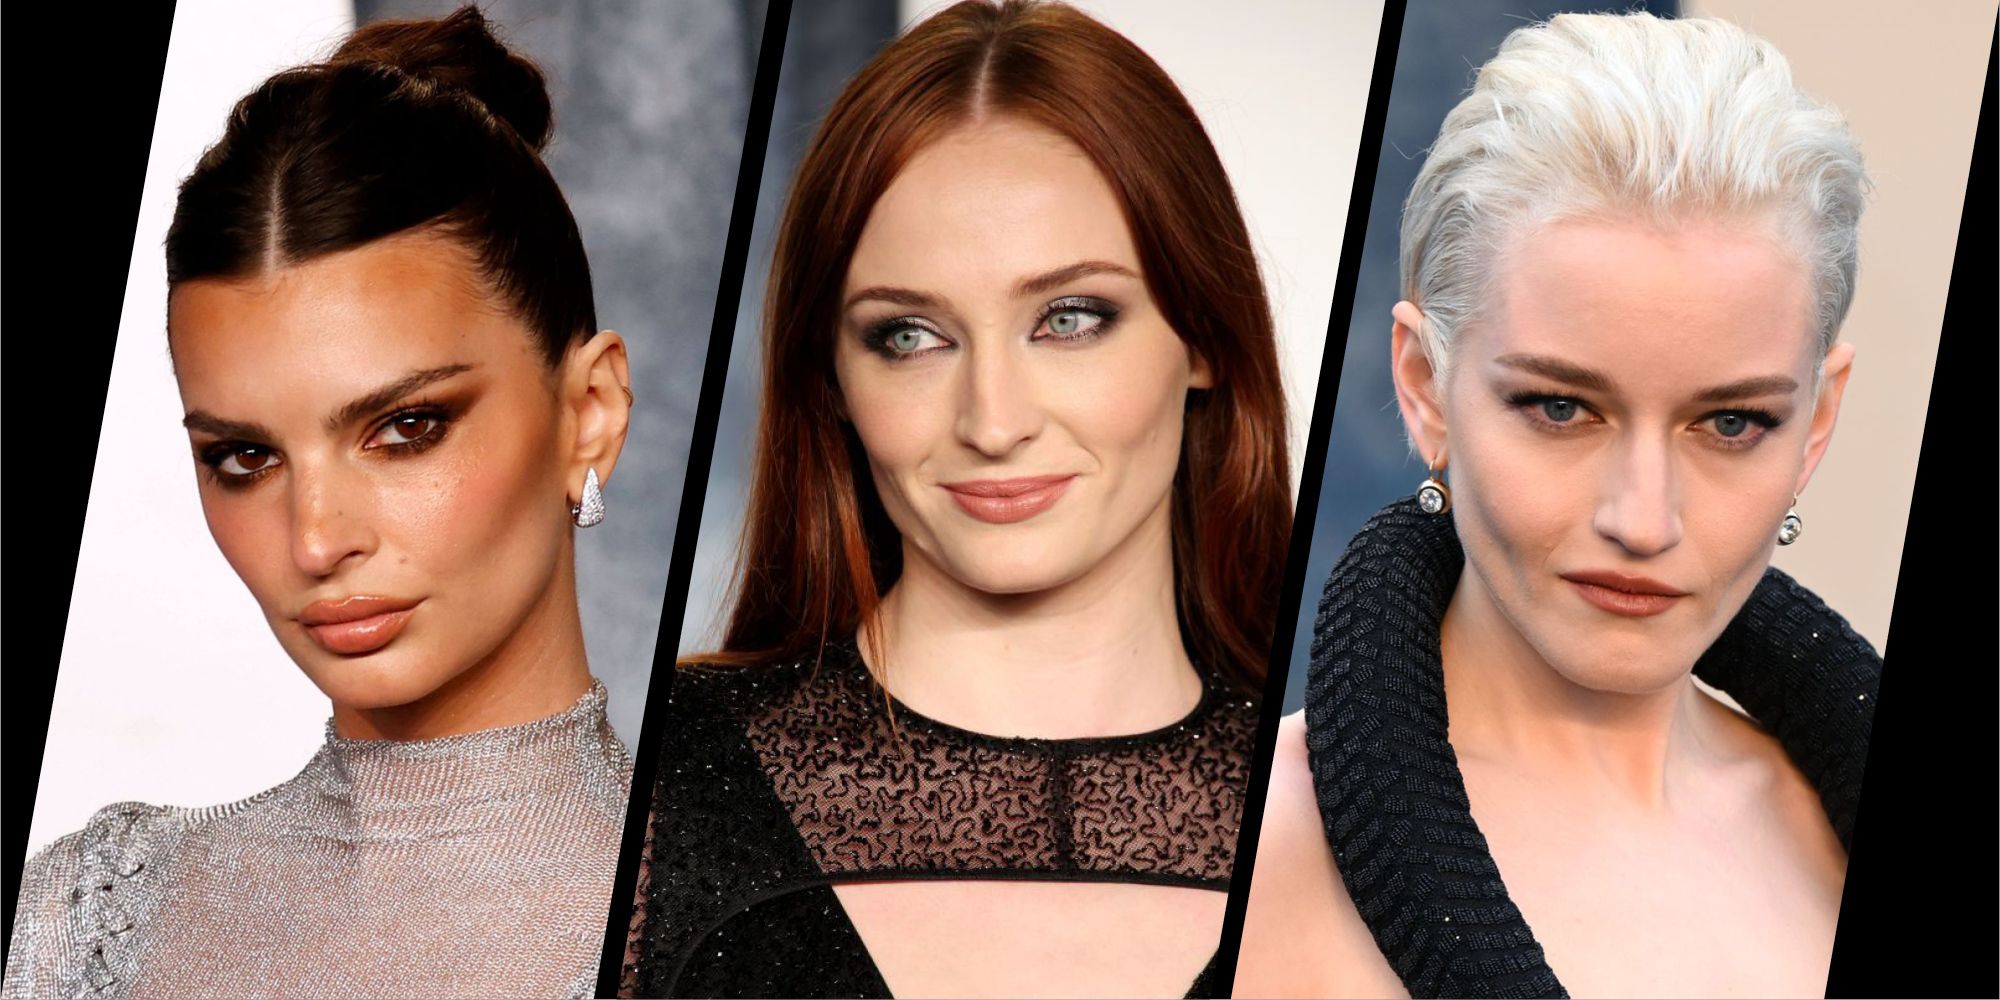 Soft goth glamour was a big beauty trend at the 2023 Oscars after